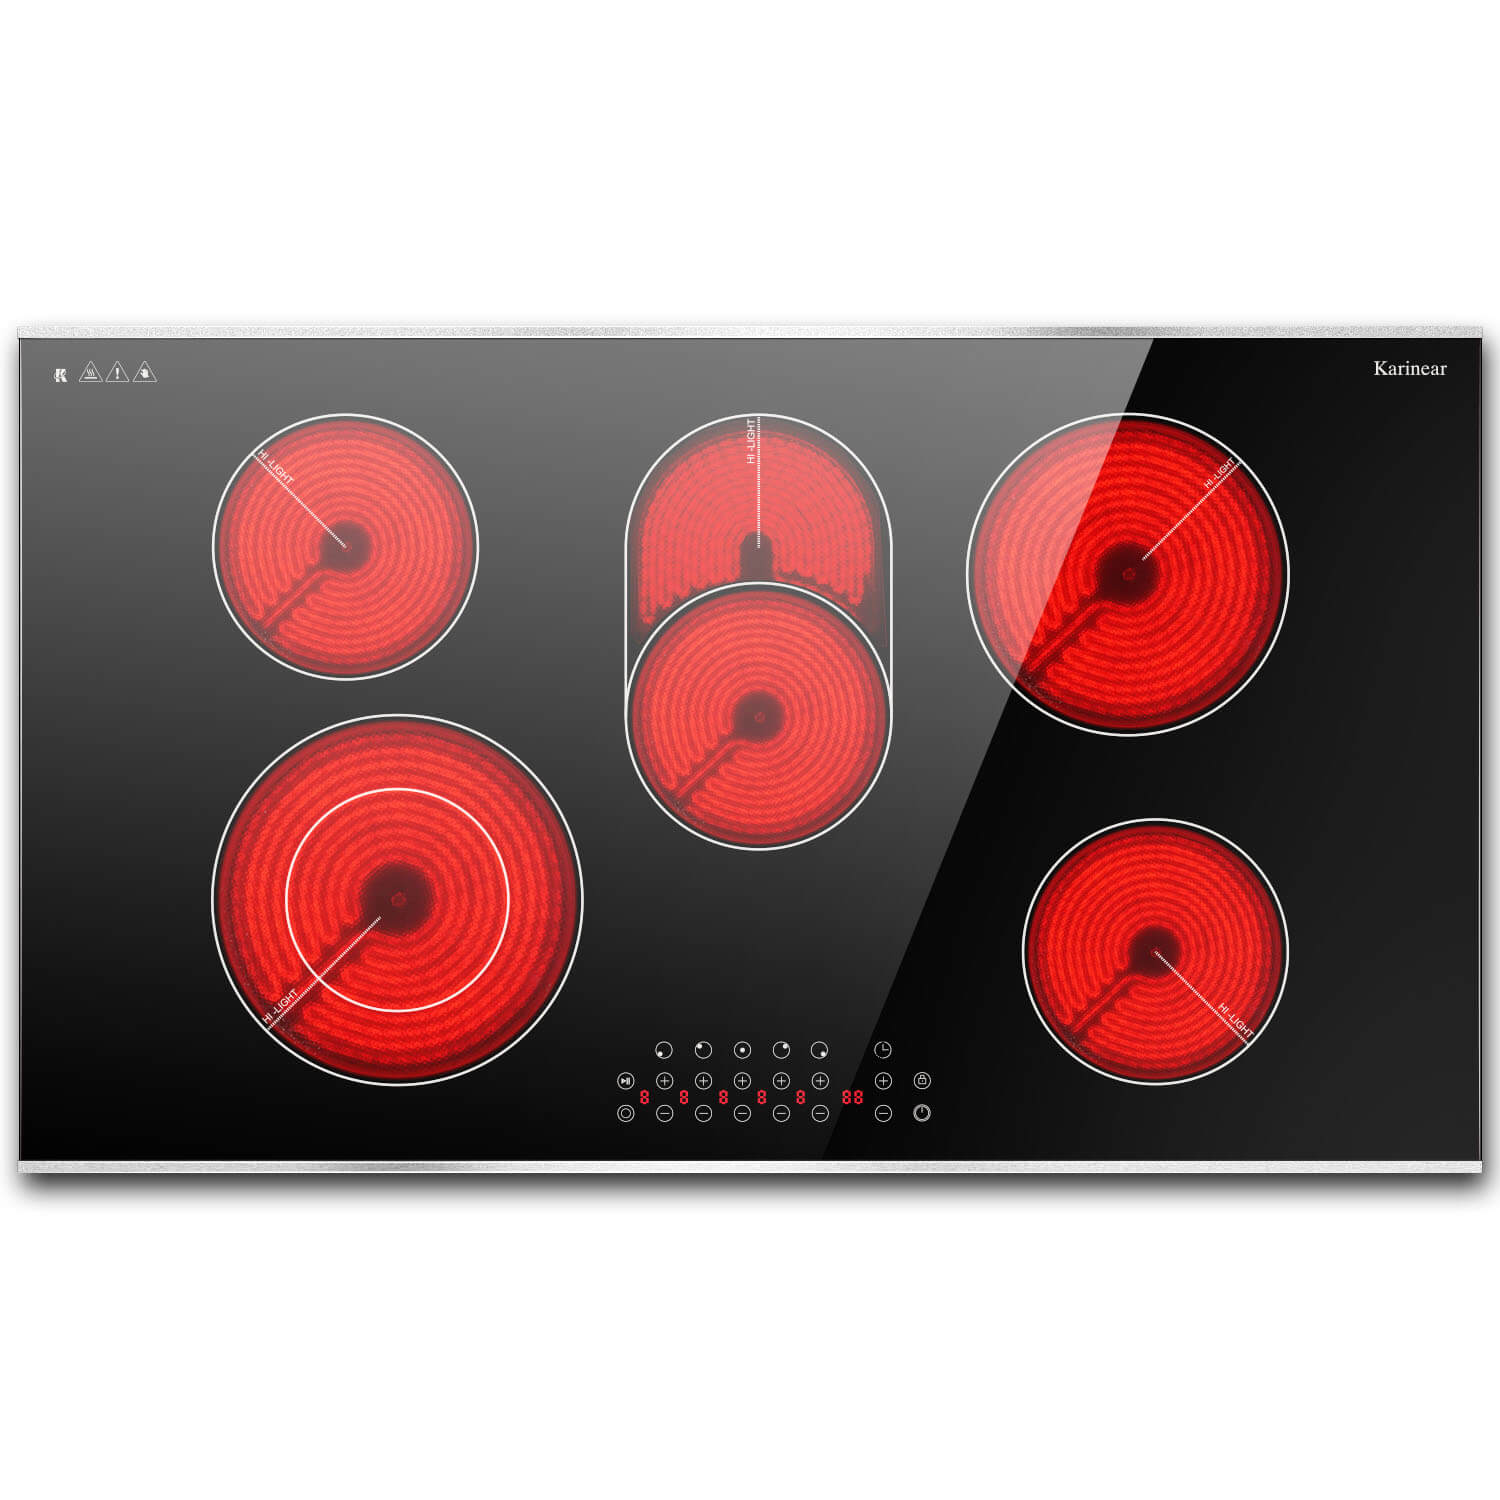 Karinear 36 Inch 5 Burner Built in Electric Cooktop - Metal Edged Protection